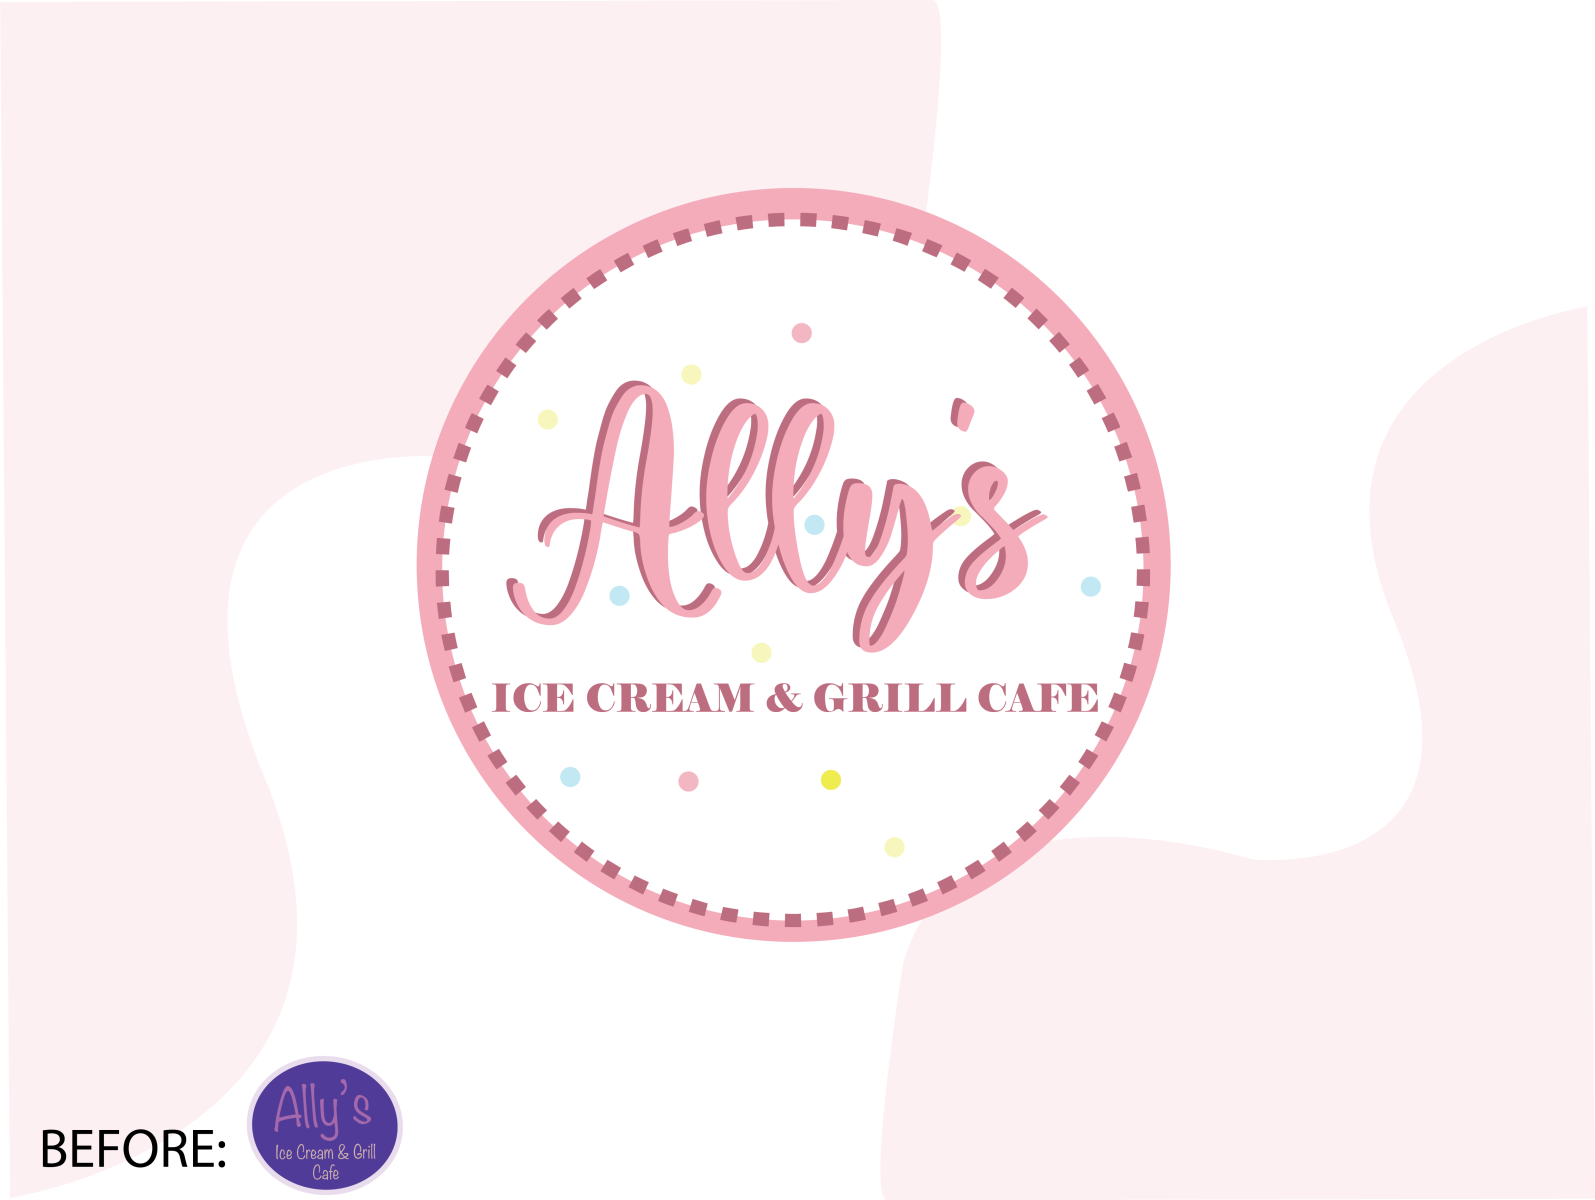 Ally's Ice Cream & Grill Cafe Brand Refresh by Kendall Peterkin on Dribbble